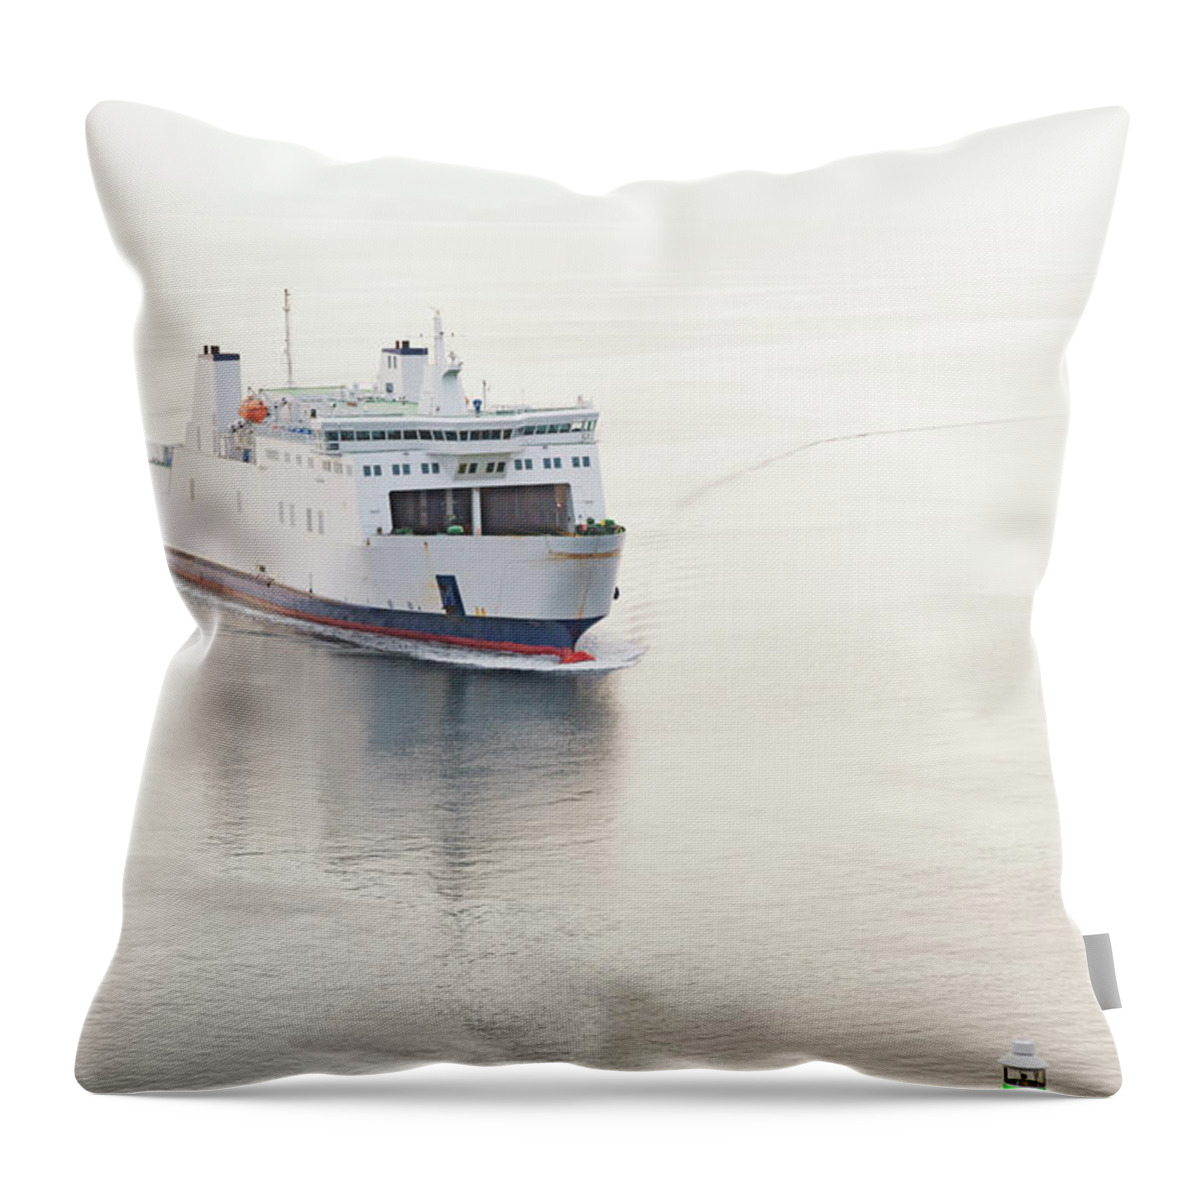 Freight Transportation Throw Pillow featuring the photograph Denmark, Aarhus, View Of Entering #1 by Westend61